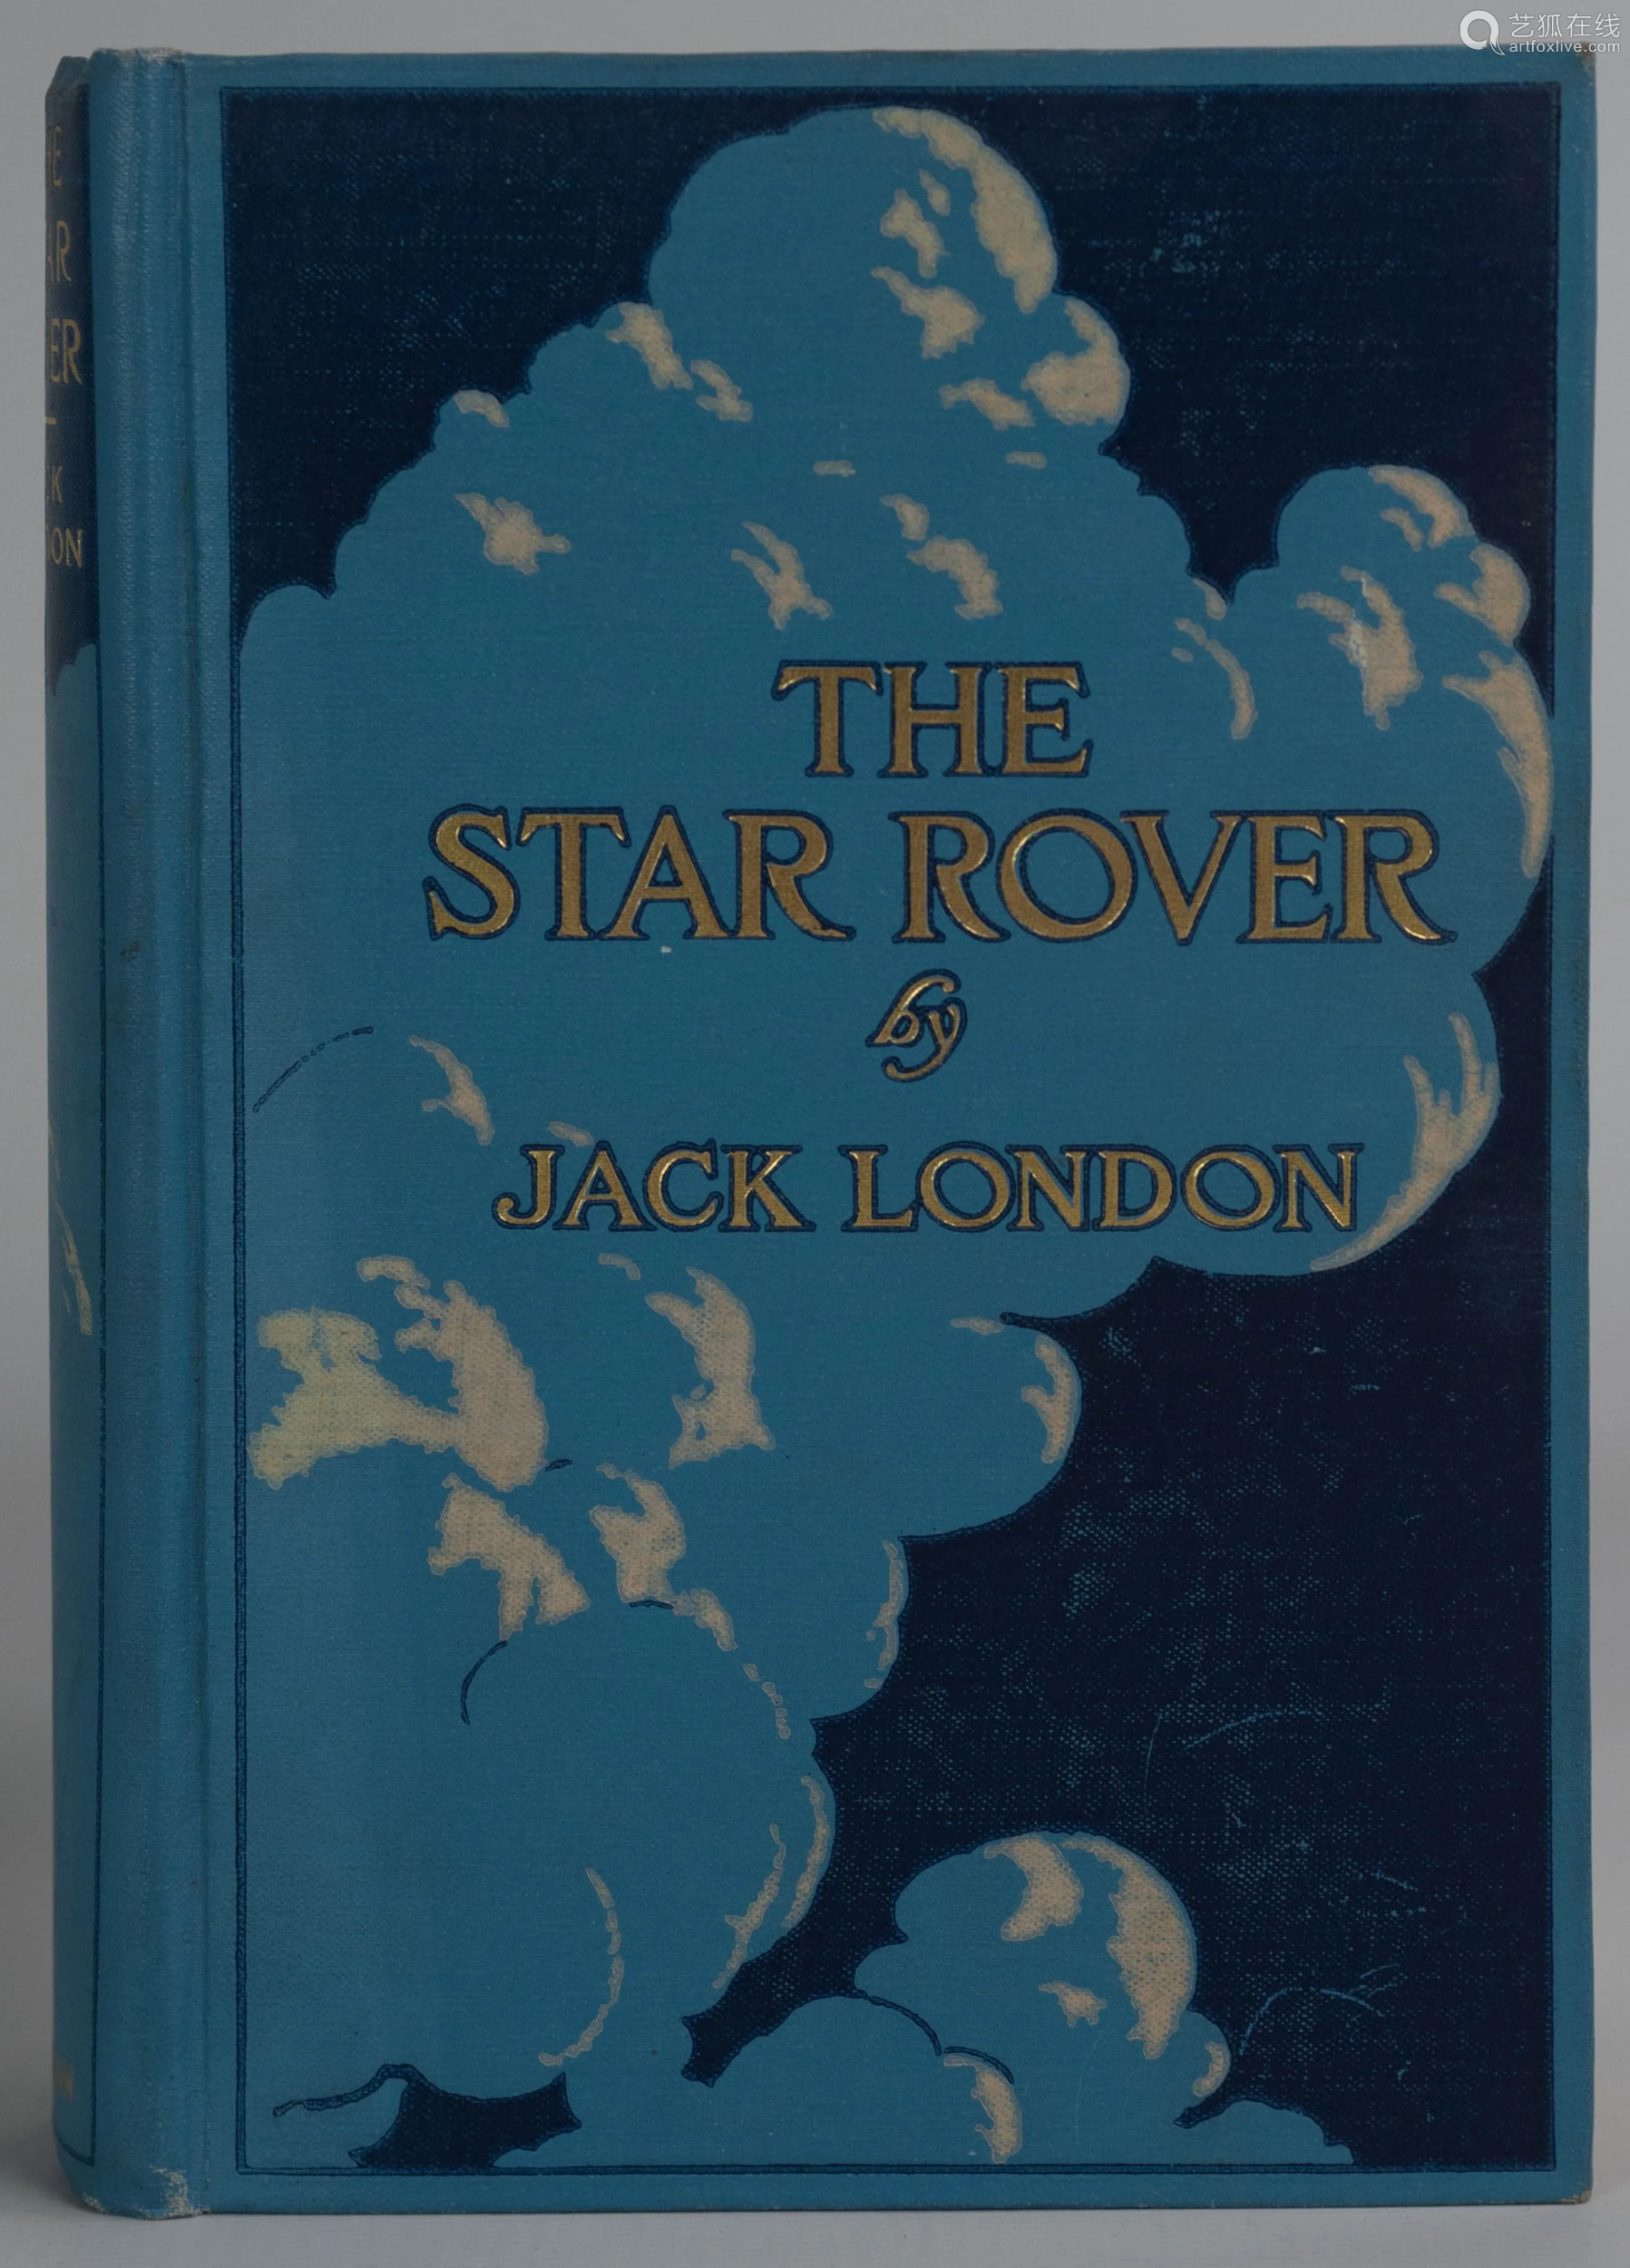 first edition - jack london "the star rover"